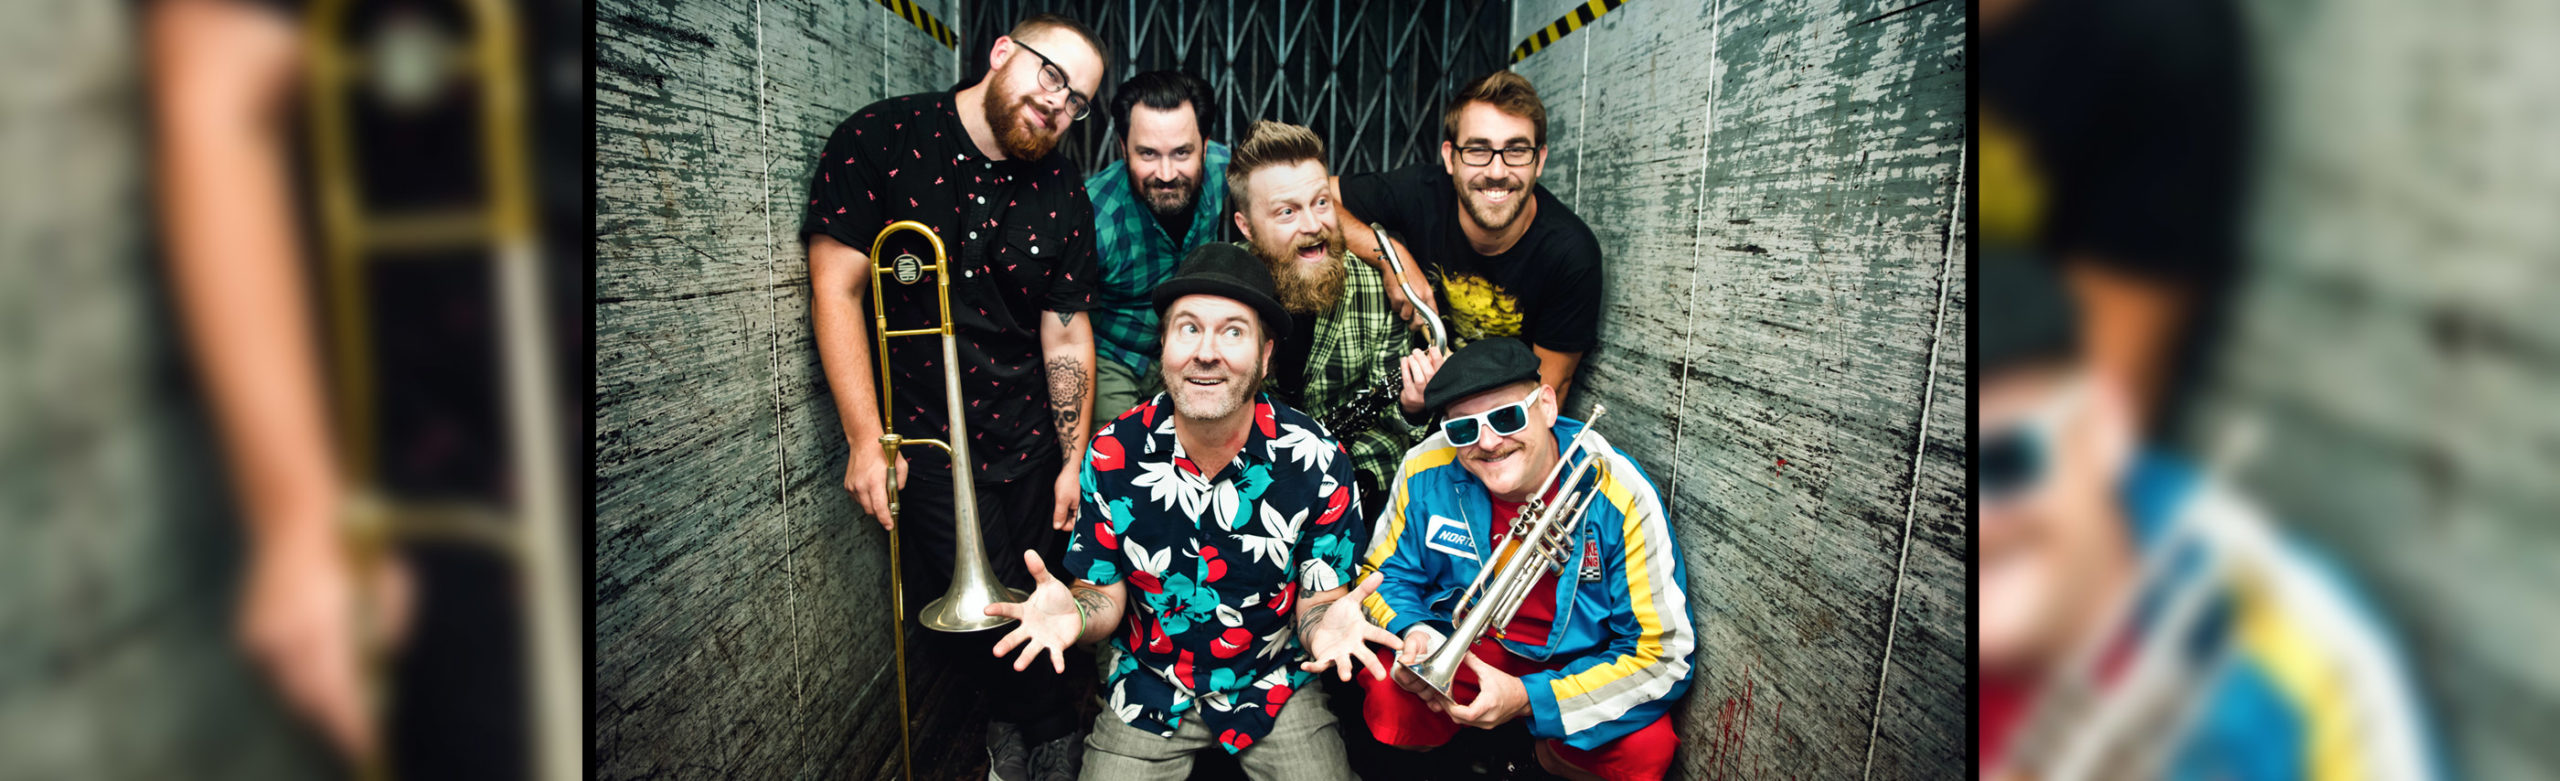 Event Info: Reel Big Fish at The Wilma Image